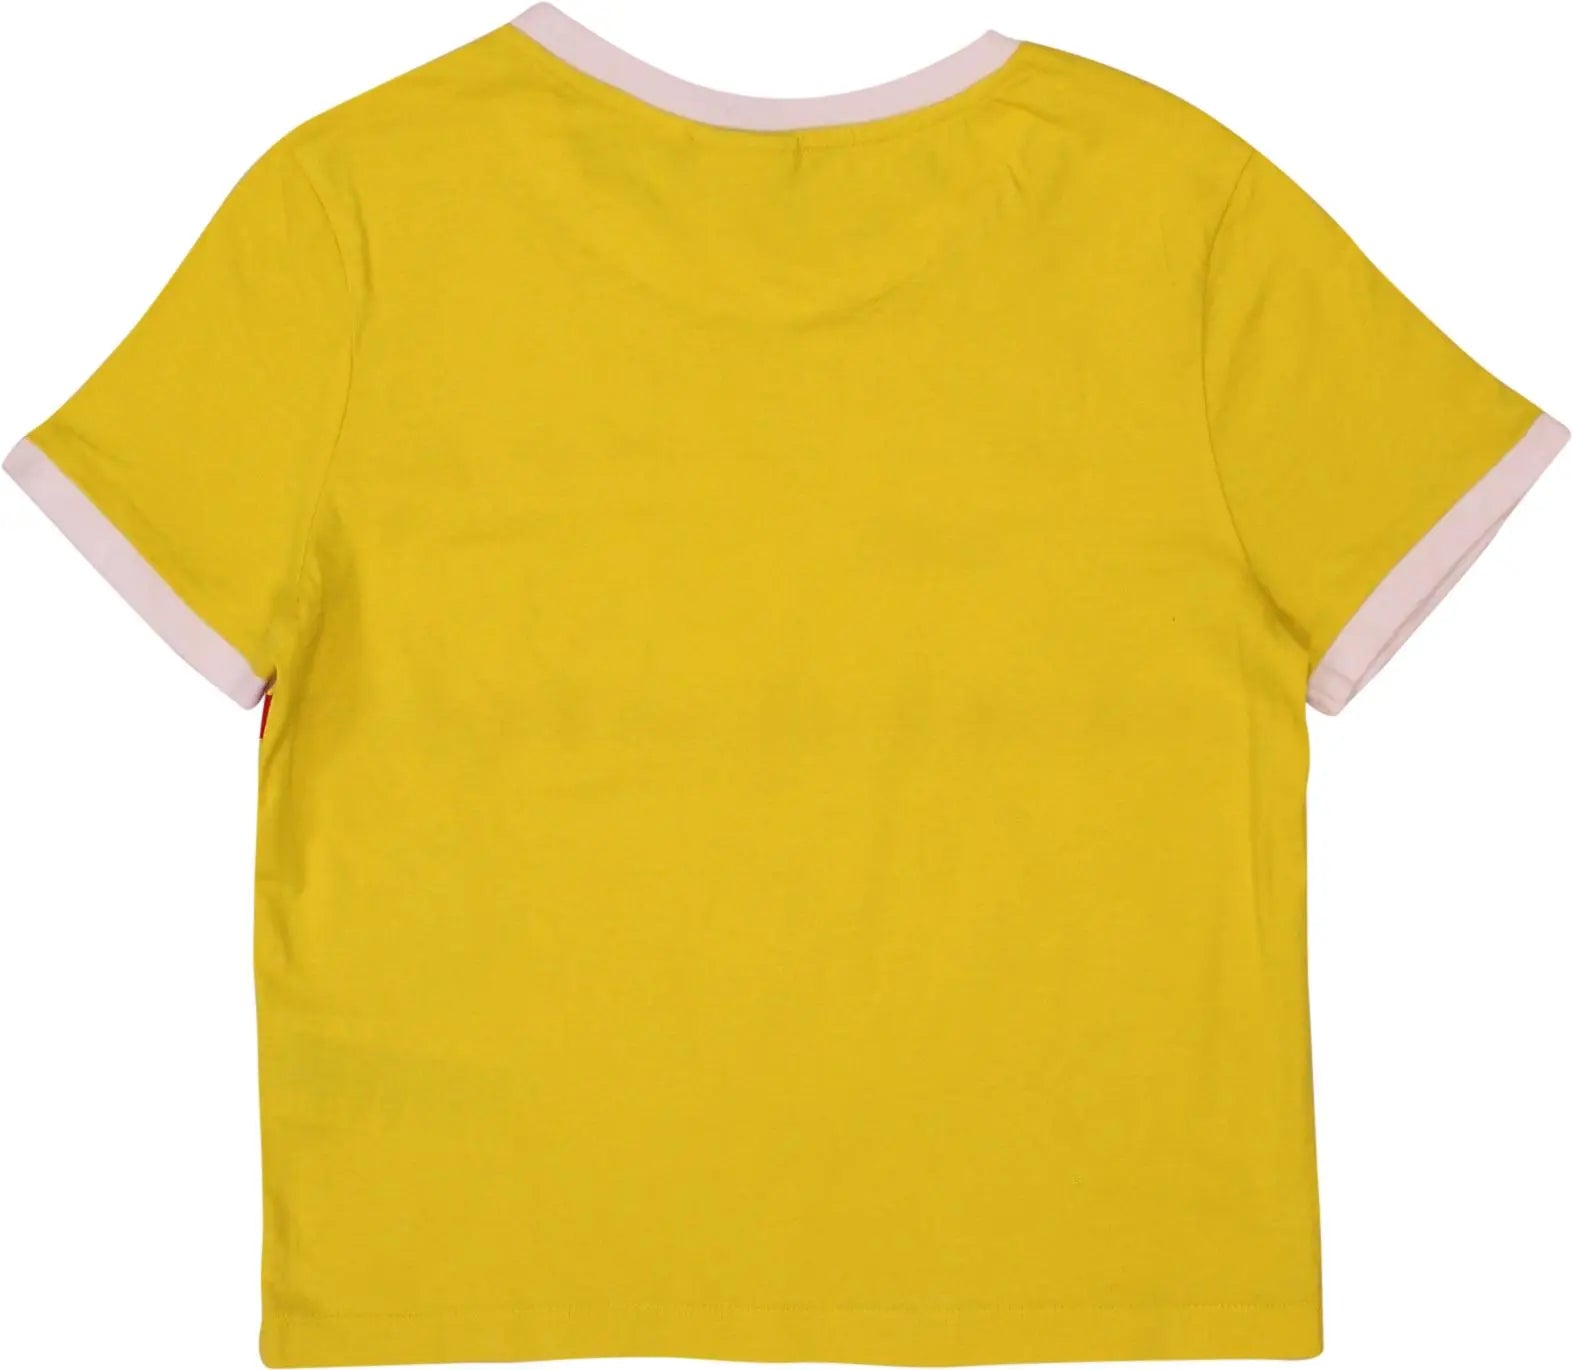 Fila - Yellow T-shirt by Fila- ThriftTale.com - Vintage and second handclothing